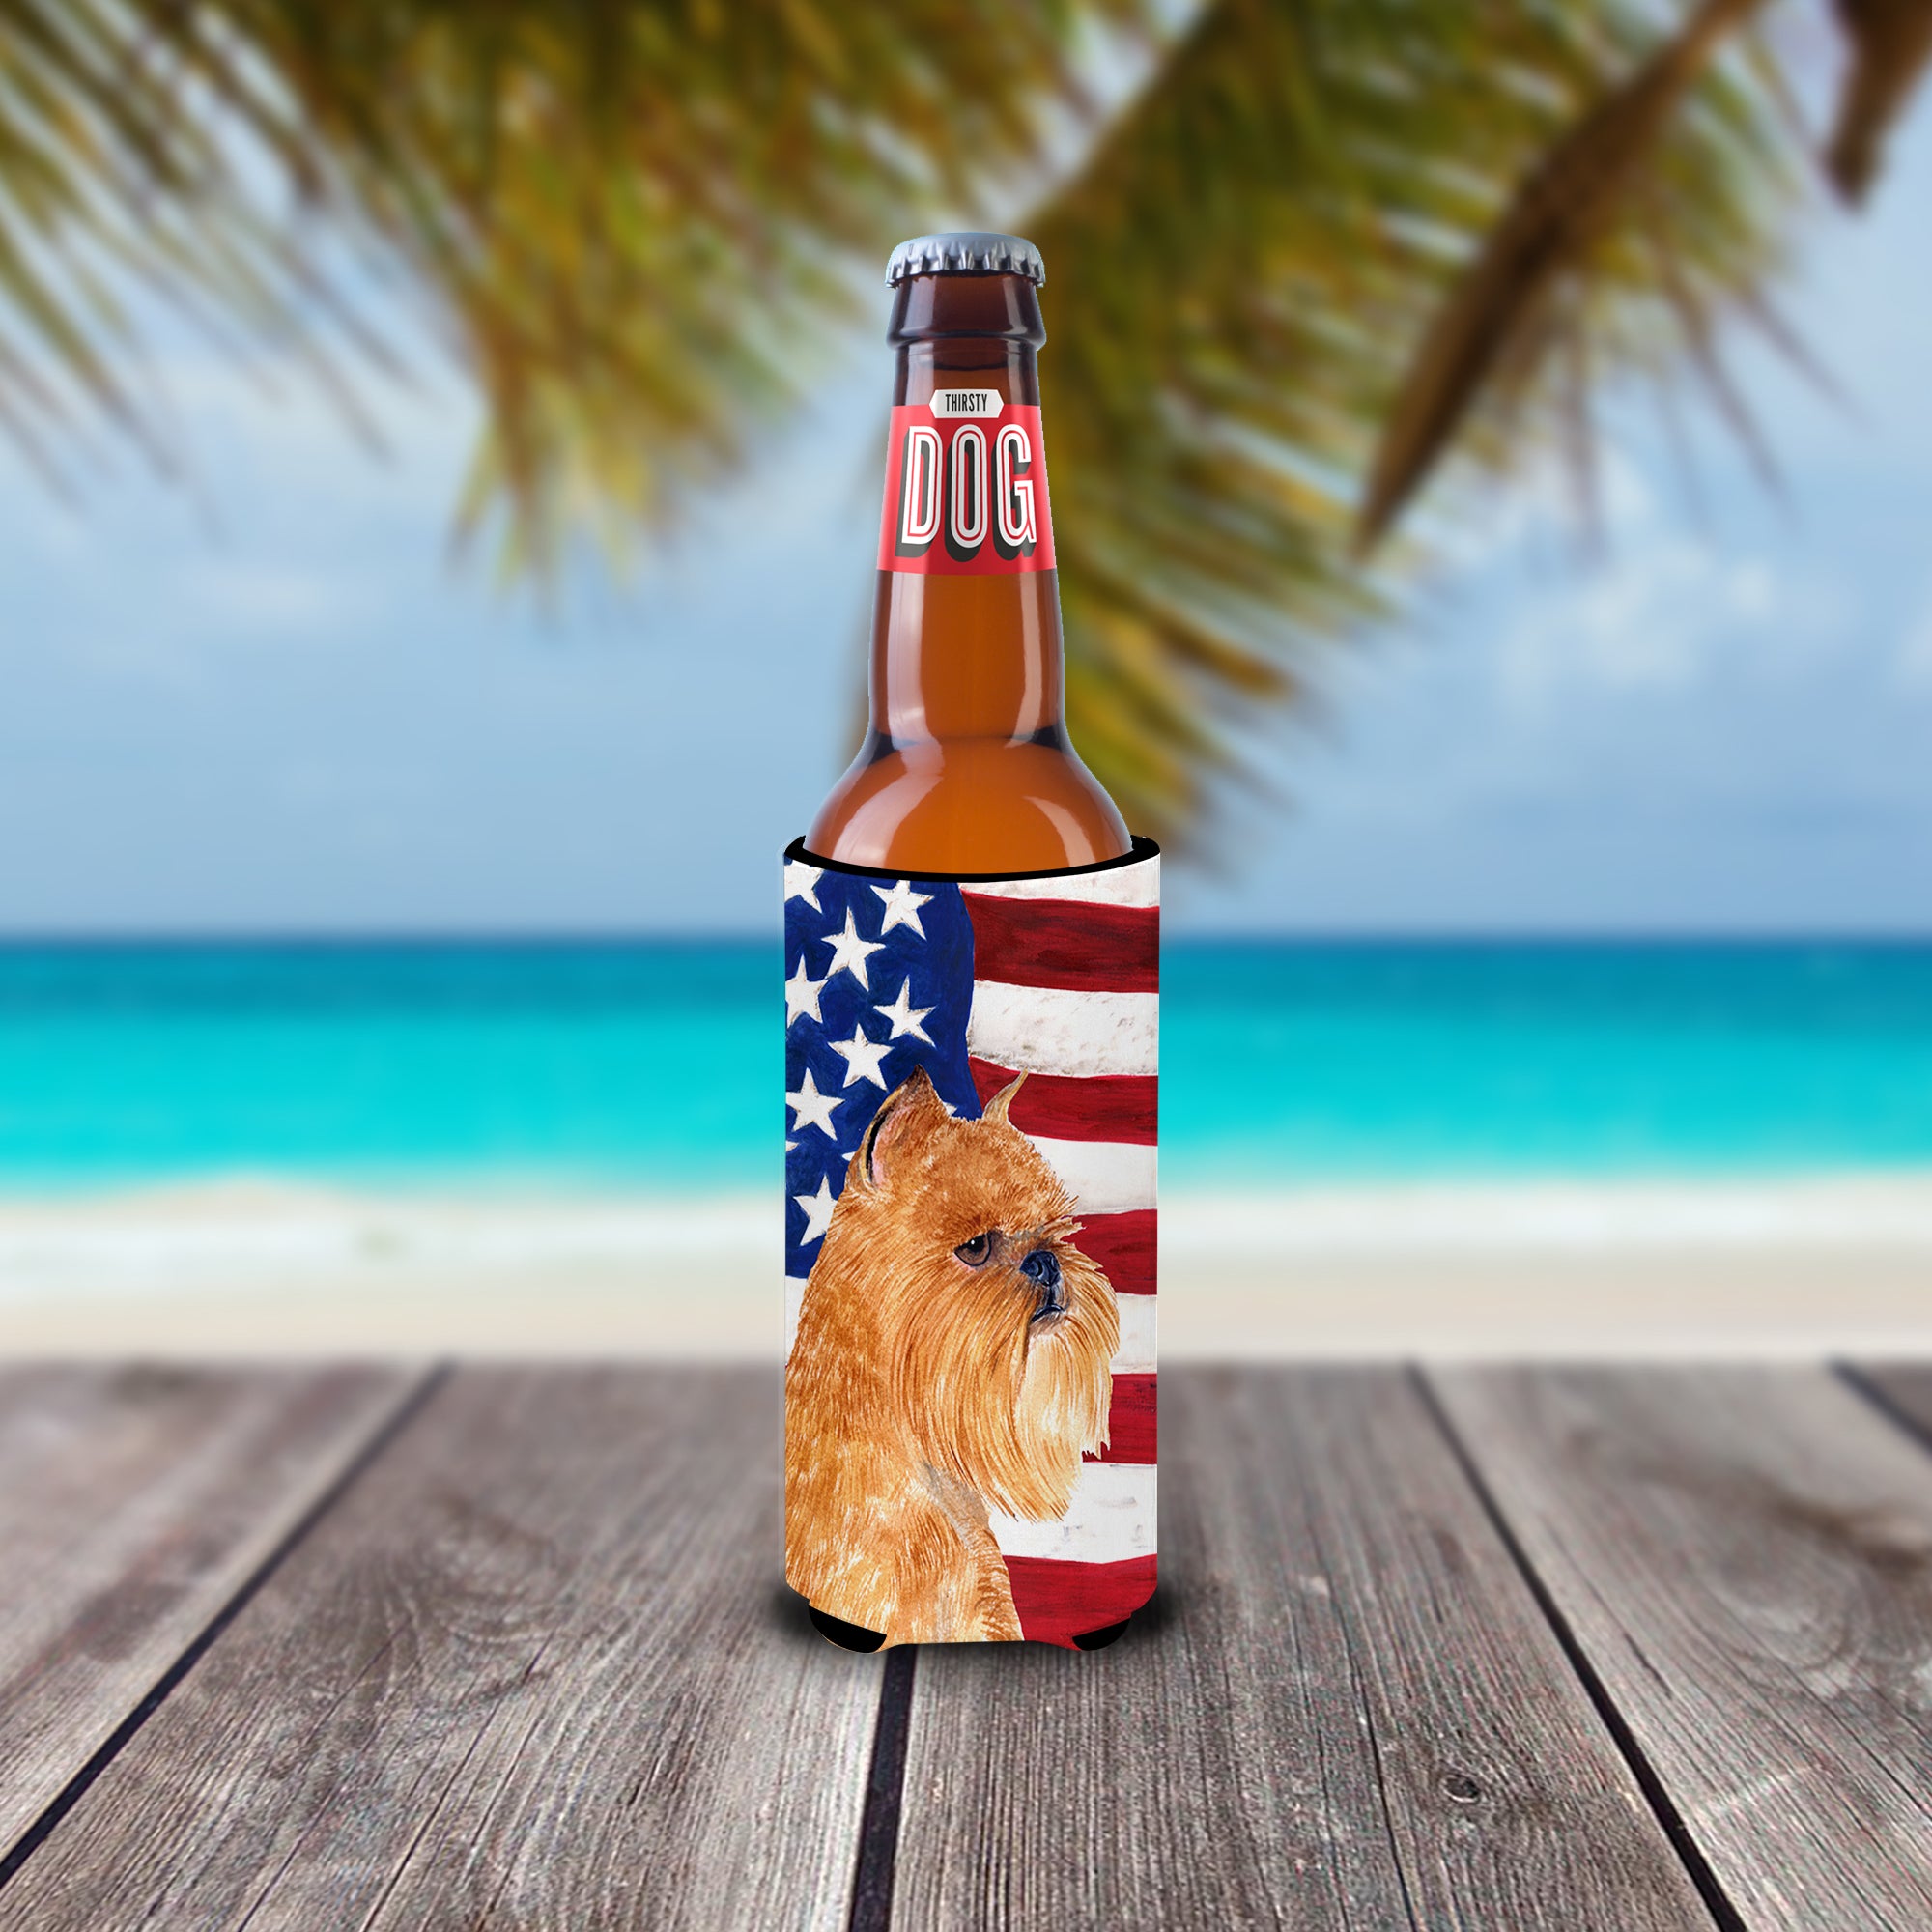 USA American Flag with Brussels Griffon Ultra Beverage Insulators for slim cans SS4020MUK.